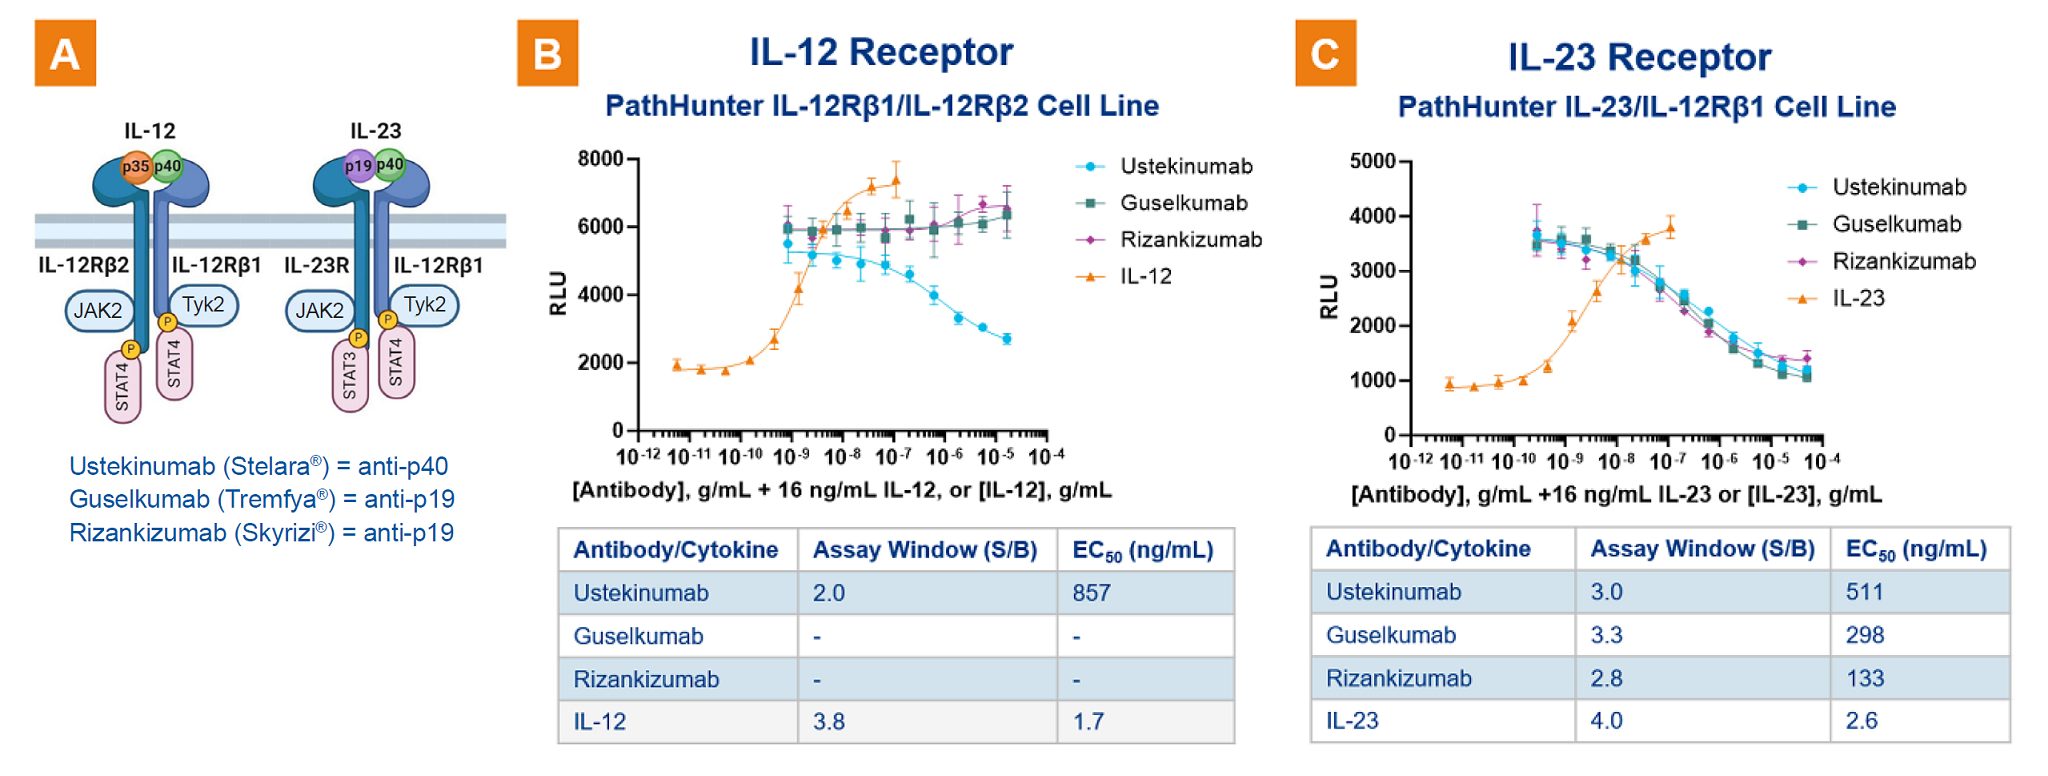 Therapeutics targeting p40 subunit of IL-23 and IL-12